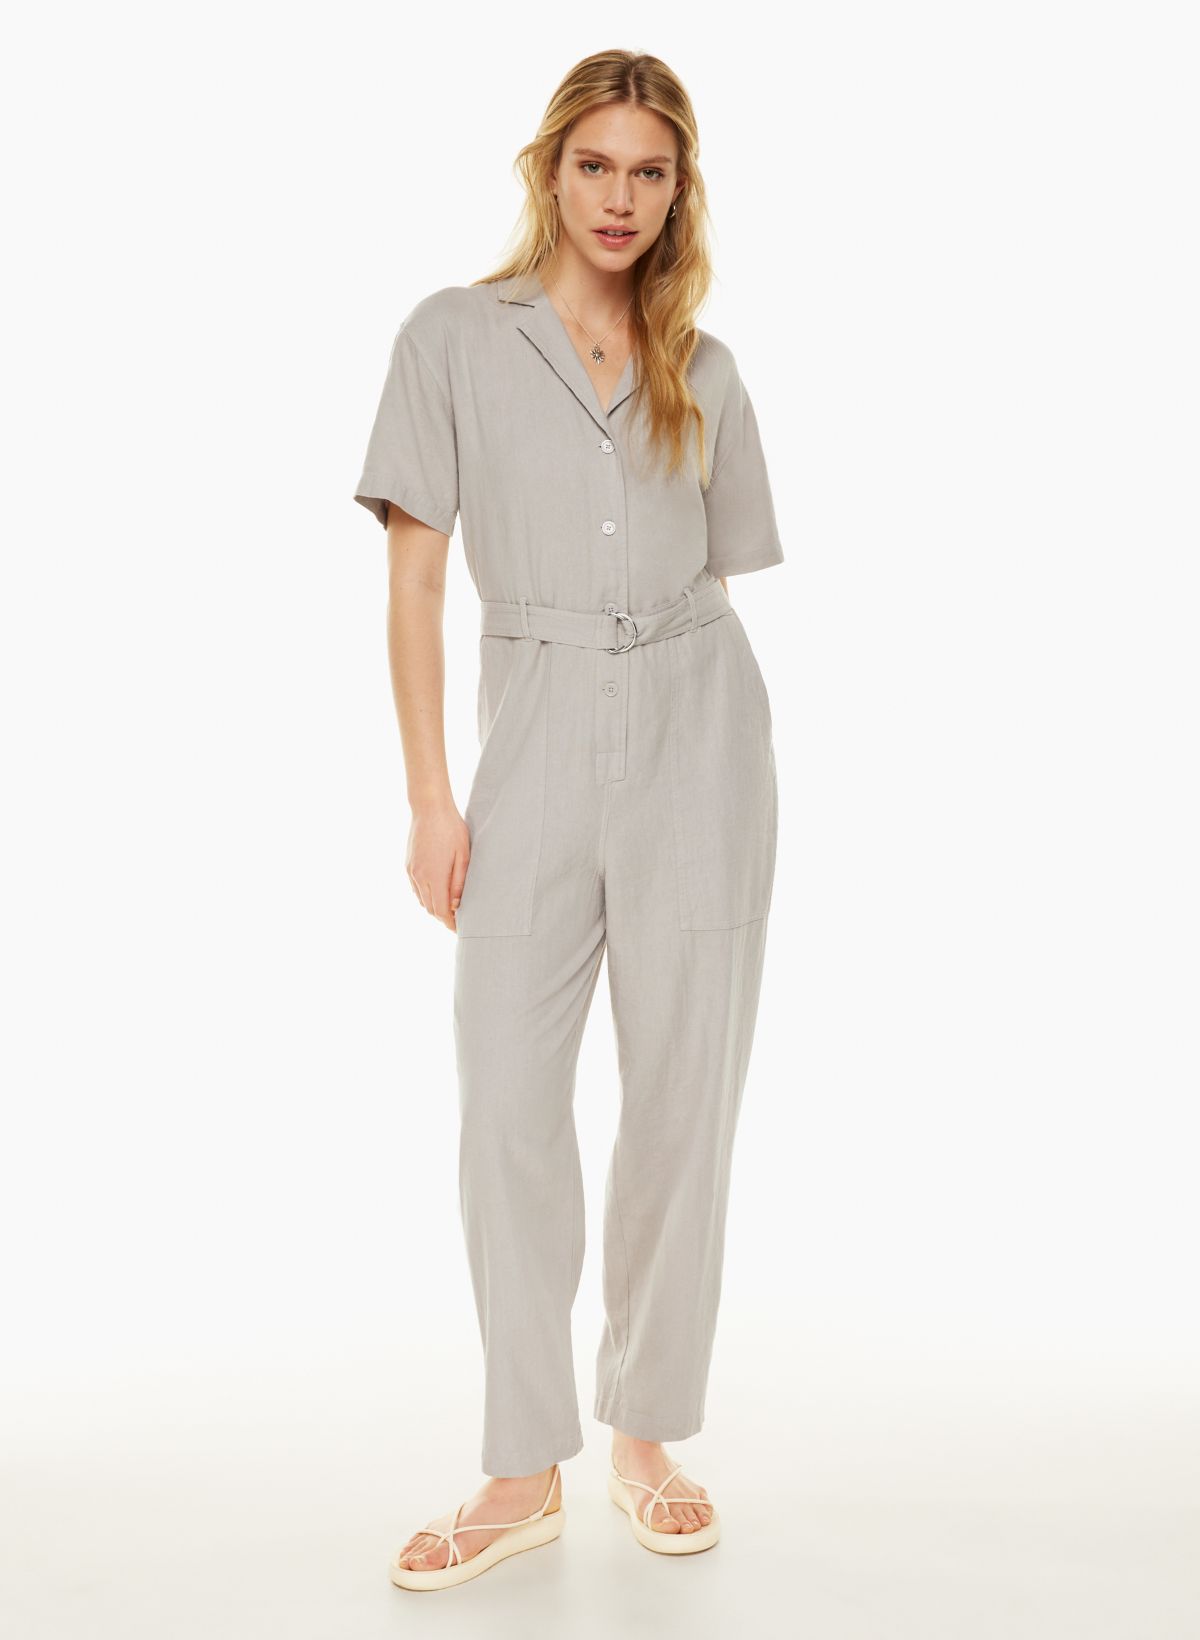 Aritzia Wilfred free divinity romper  Romper outfit, Clothes design,  Rompers